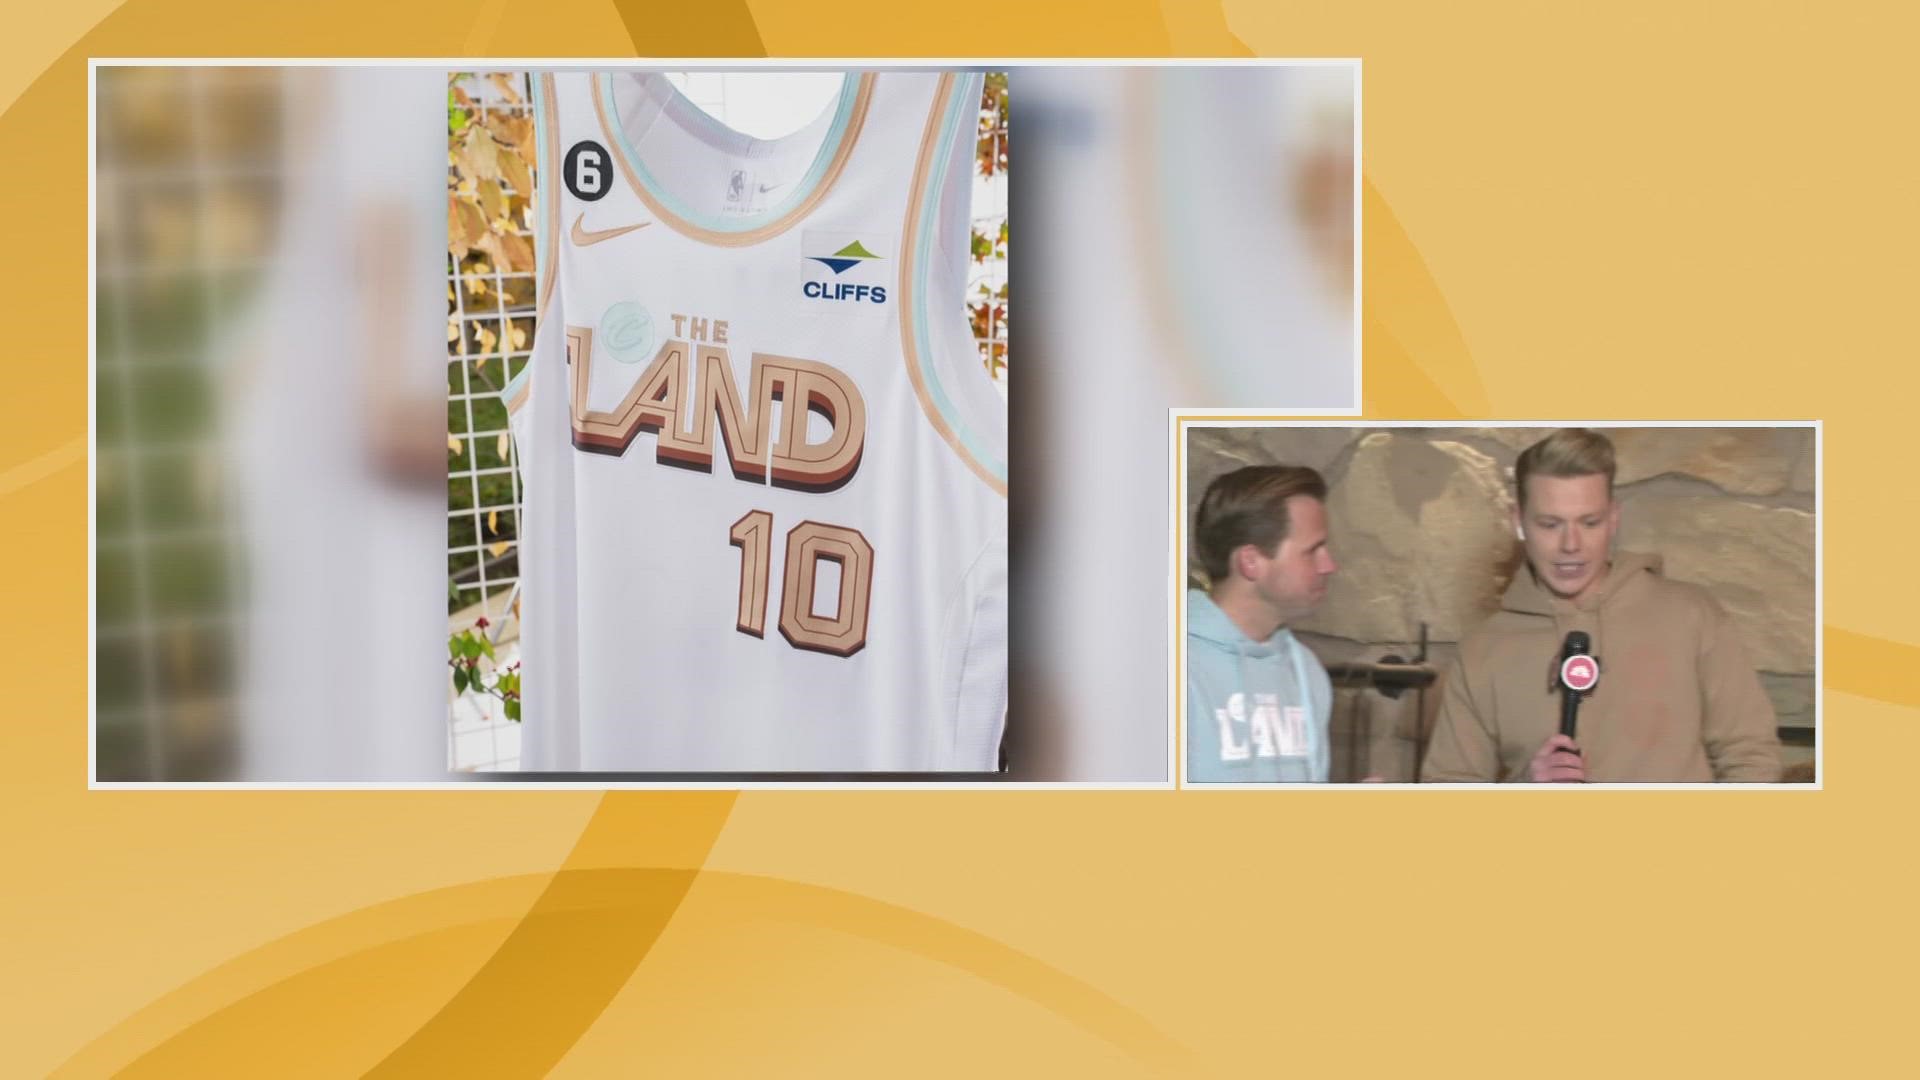 The Cleveland Cavaliers are teaming up with the Cleveland Metroparks for the City Edition game on Saturday. 3News' Austin Love has a sneak peek.